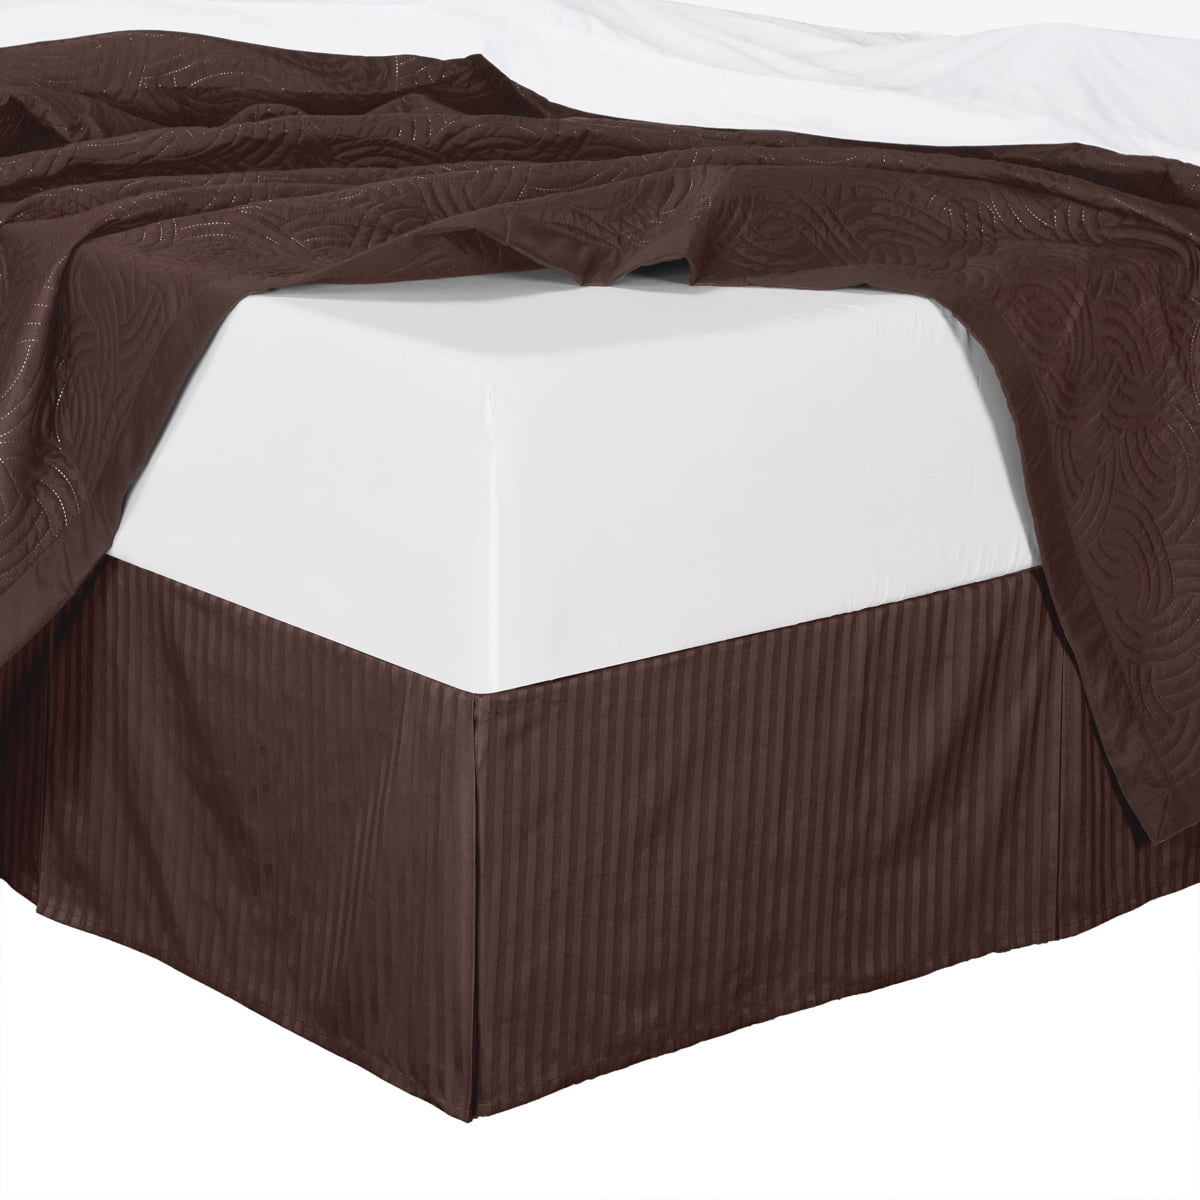 Details about   100% Microfiber Ruffle Bed Skirt Split Corner Chocolate Queen/King All Size 